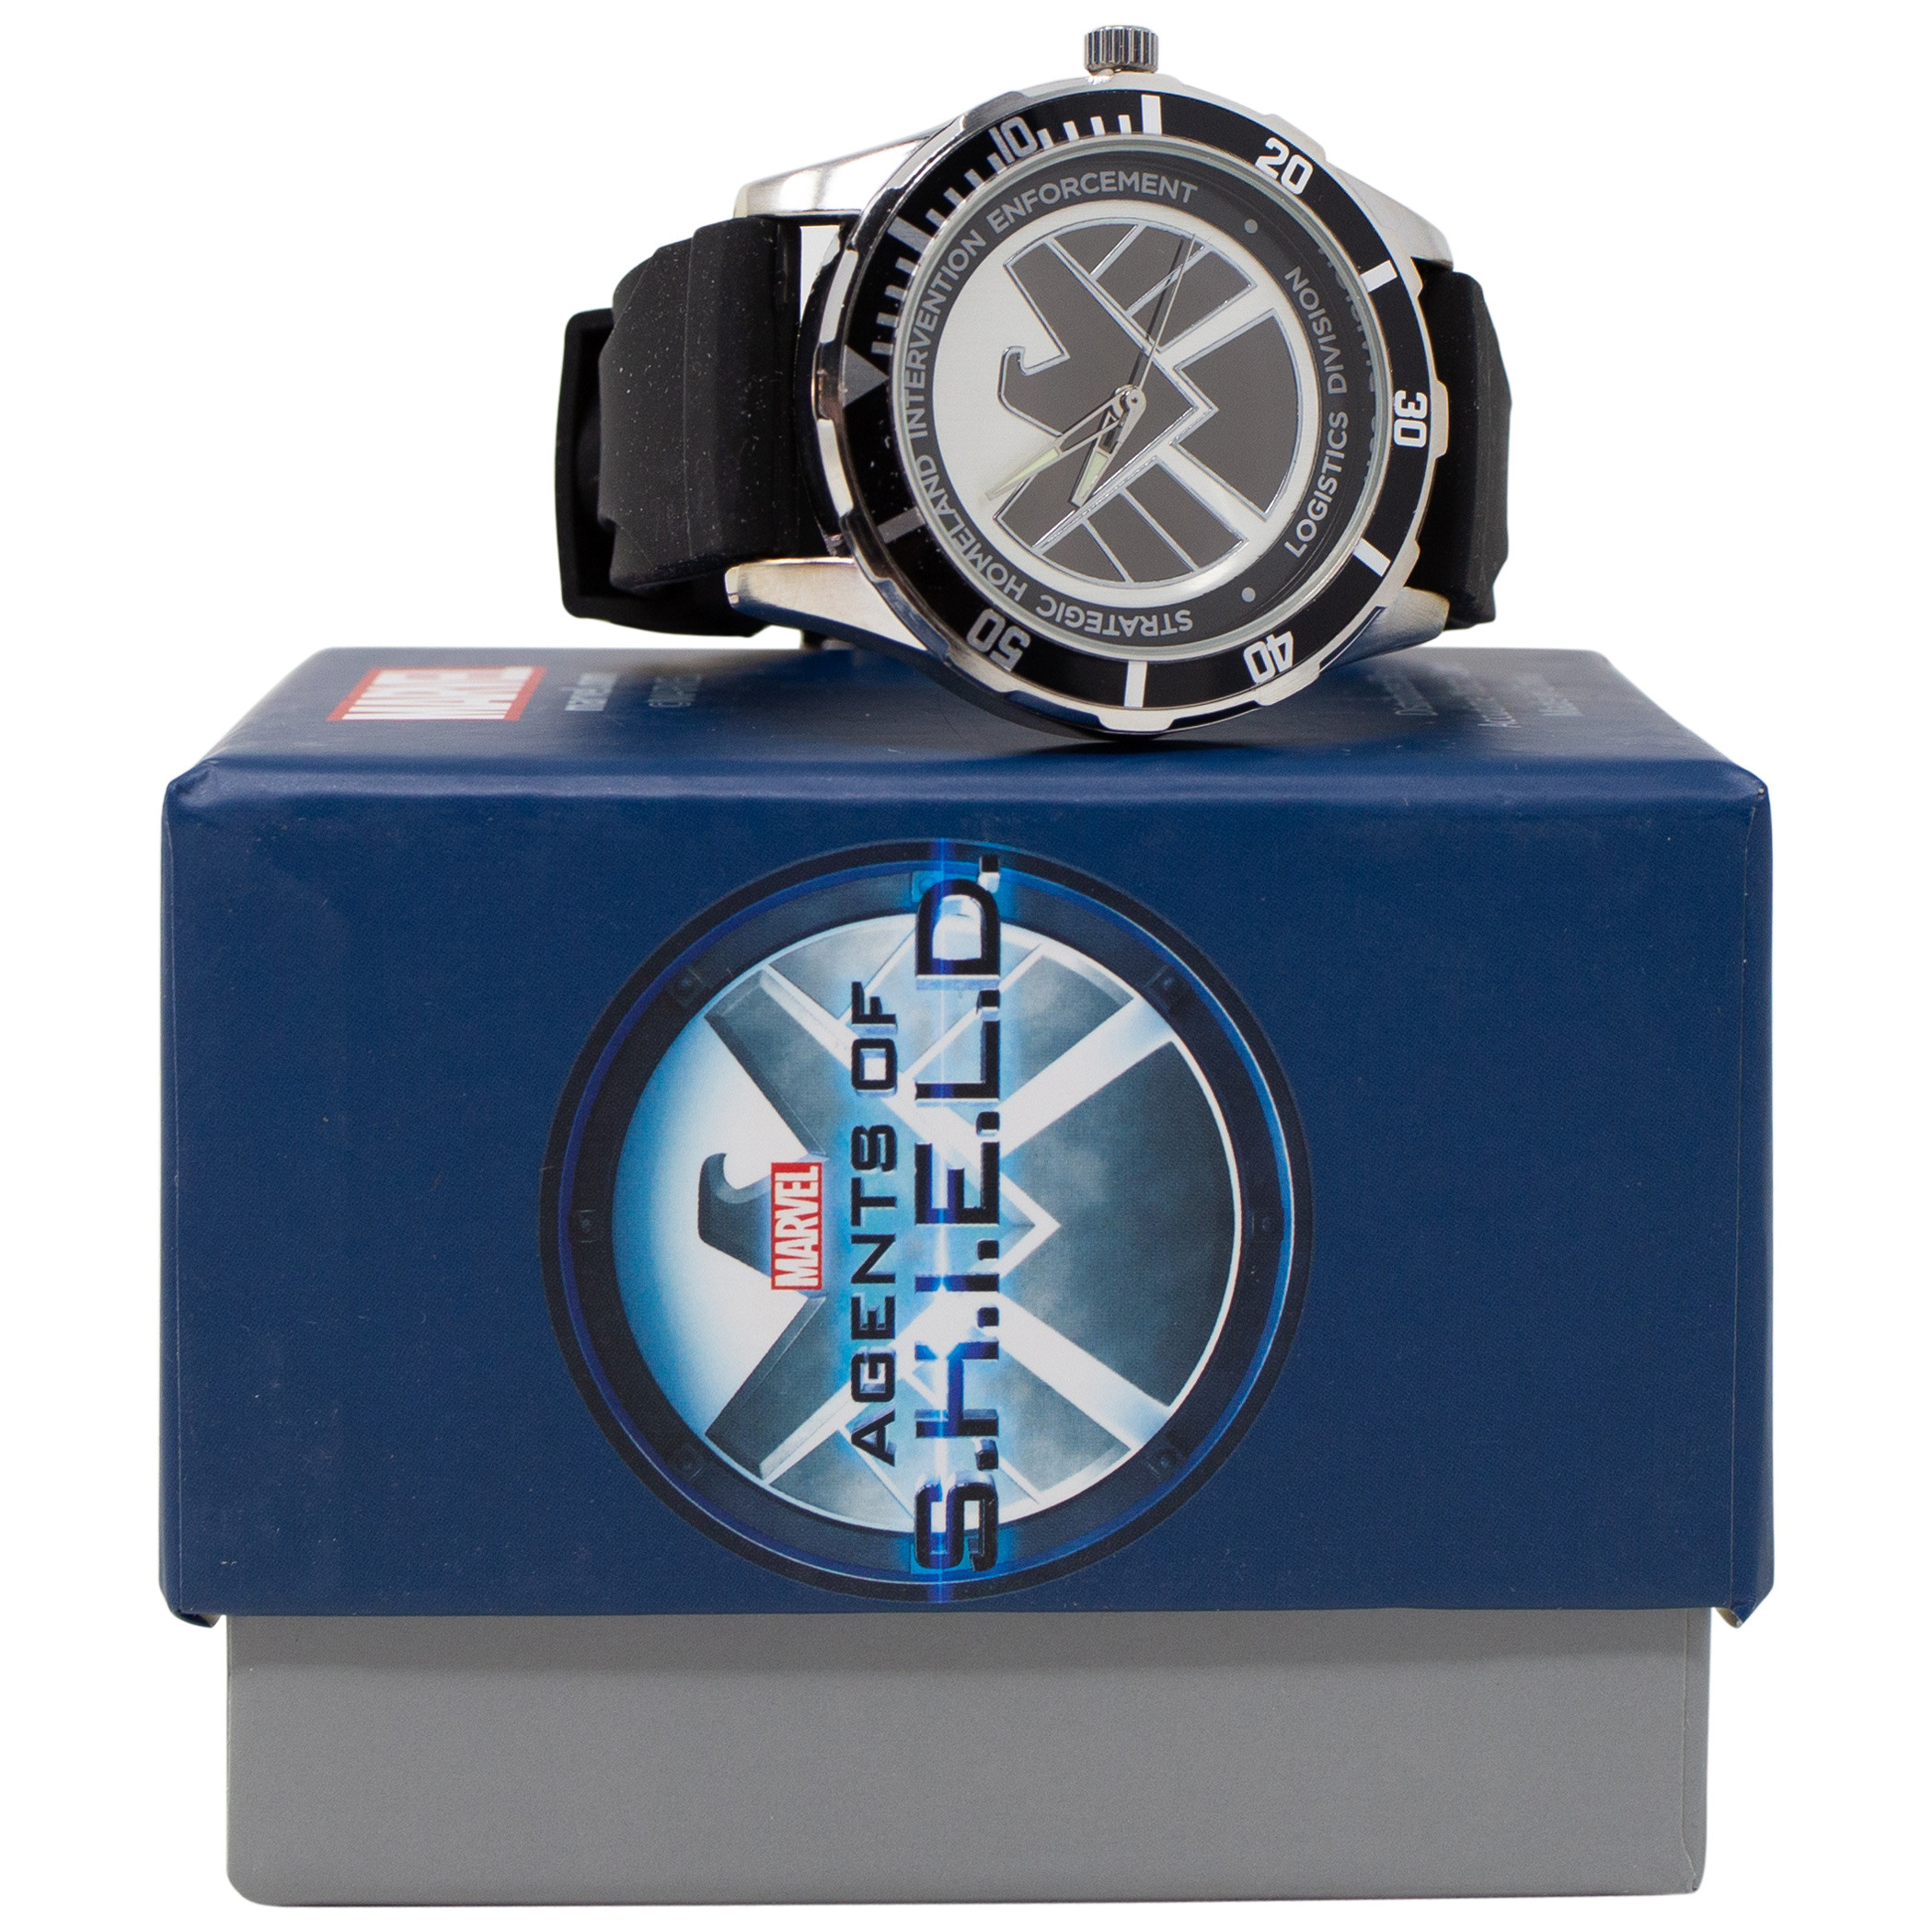 Agents of SHIELD Symbol Watch with Rubber Wristband